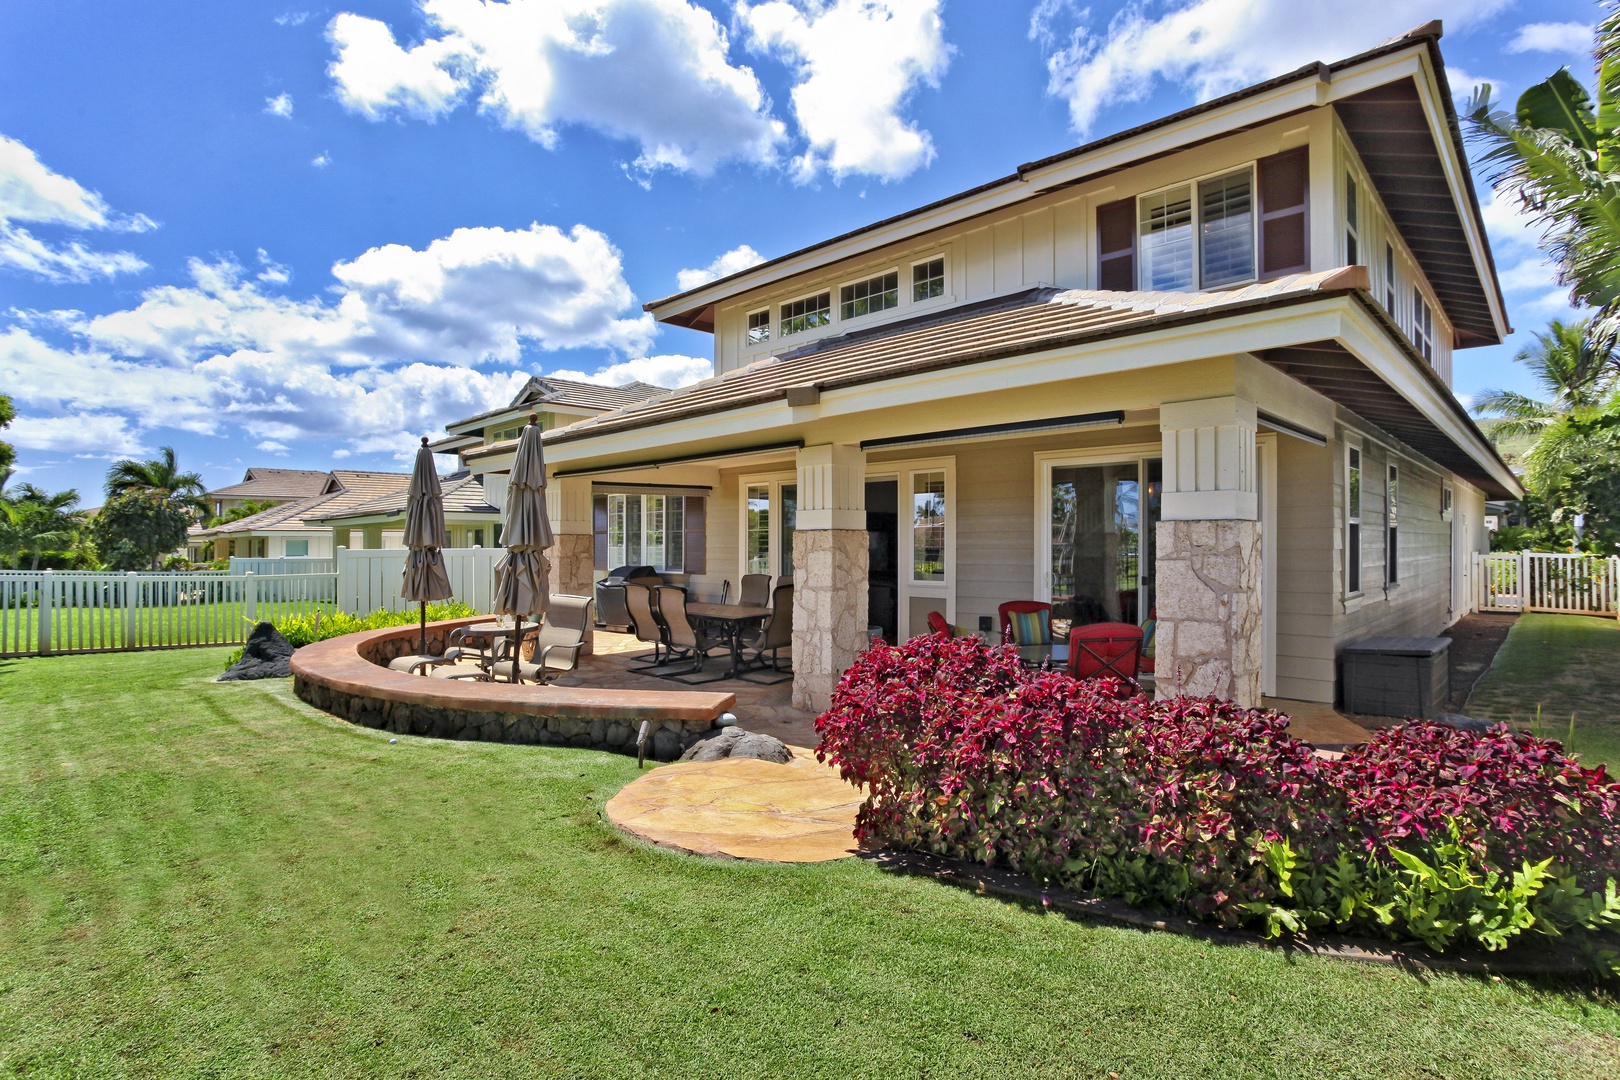 Kapolei Vacation Rentals, Ko Olina Kai Estate #20 - Picturesque skies over the home in Hawaii.